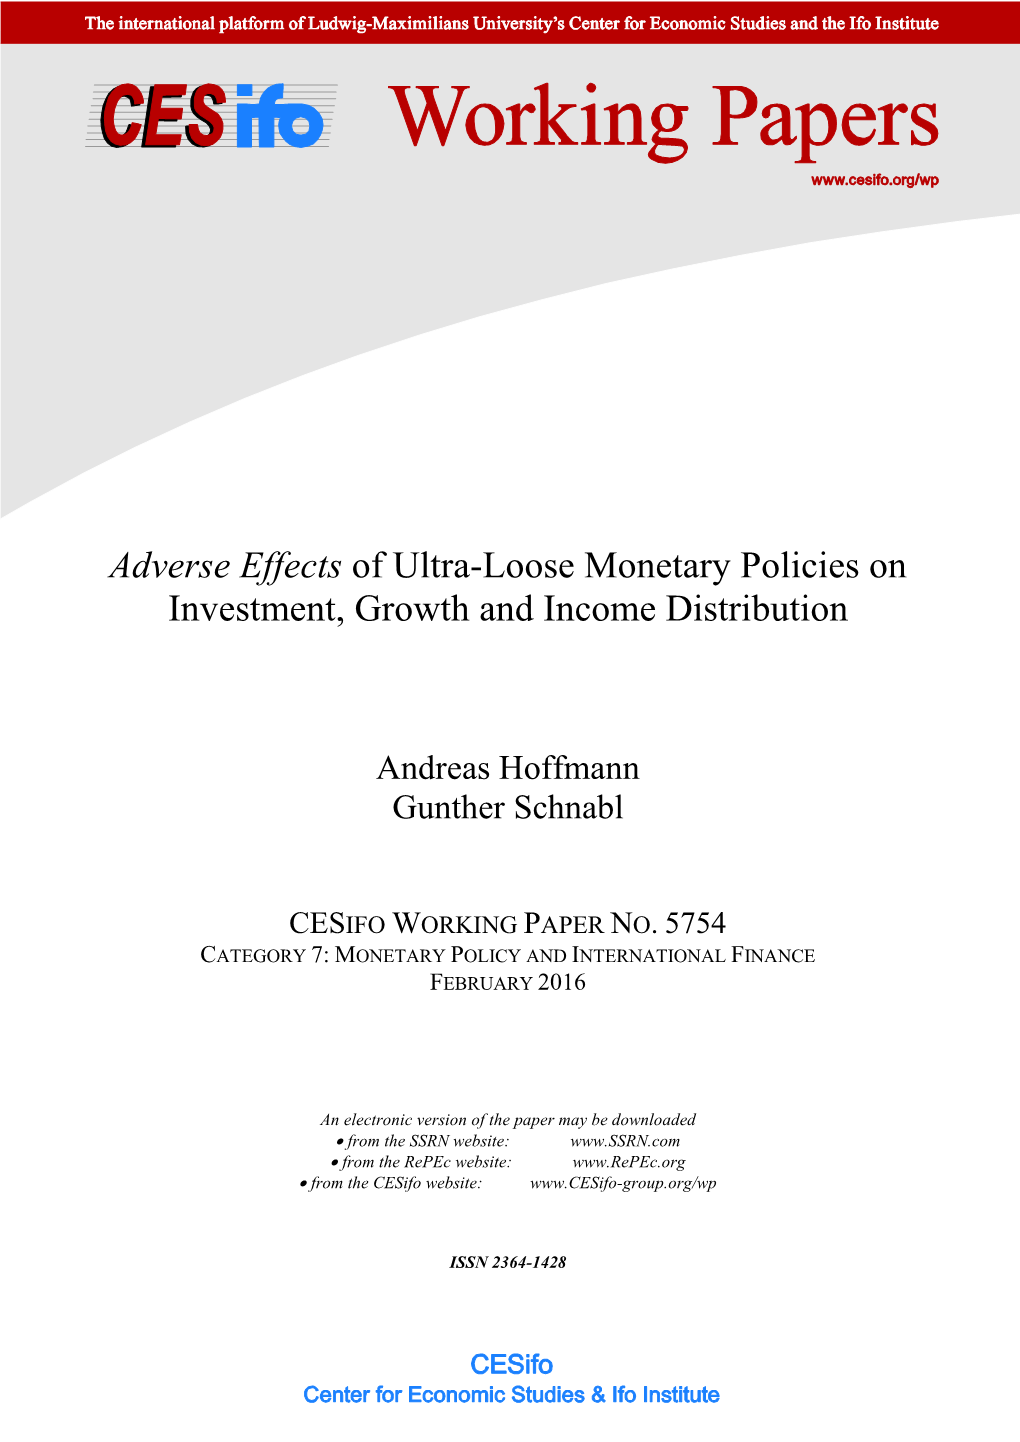 Adverse Effects of Ultra-Loose Monetary Policies on Investment, Growth and Income Distribution